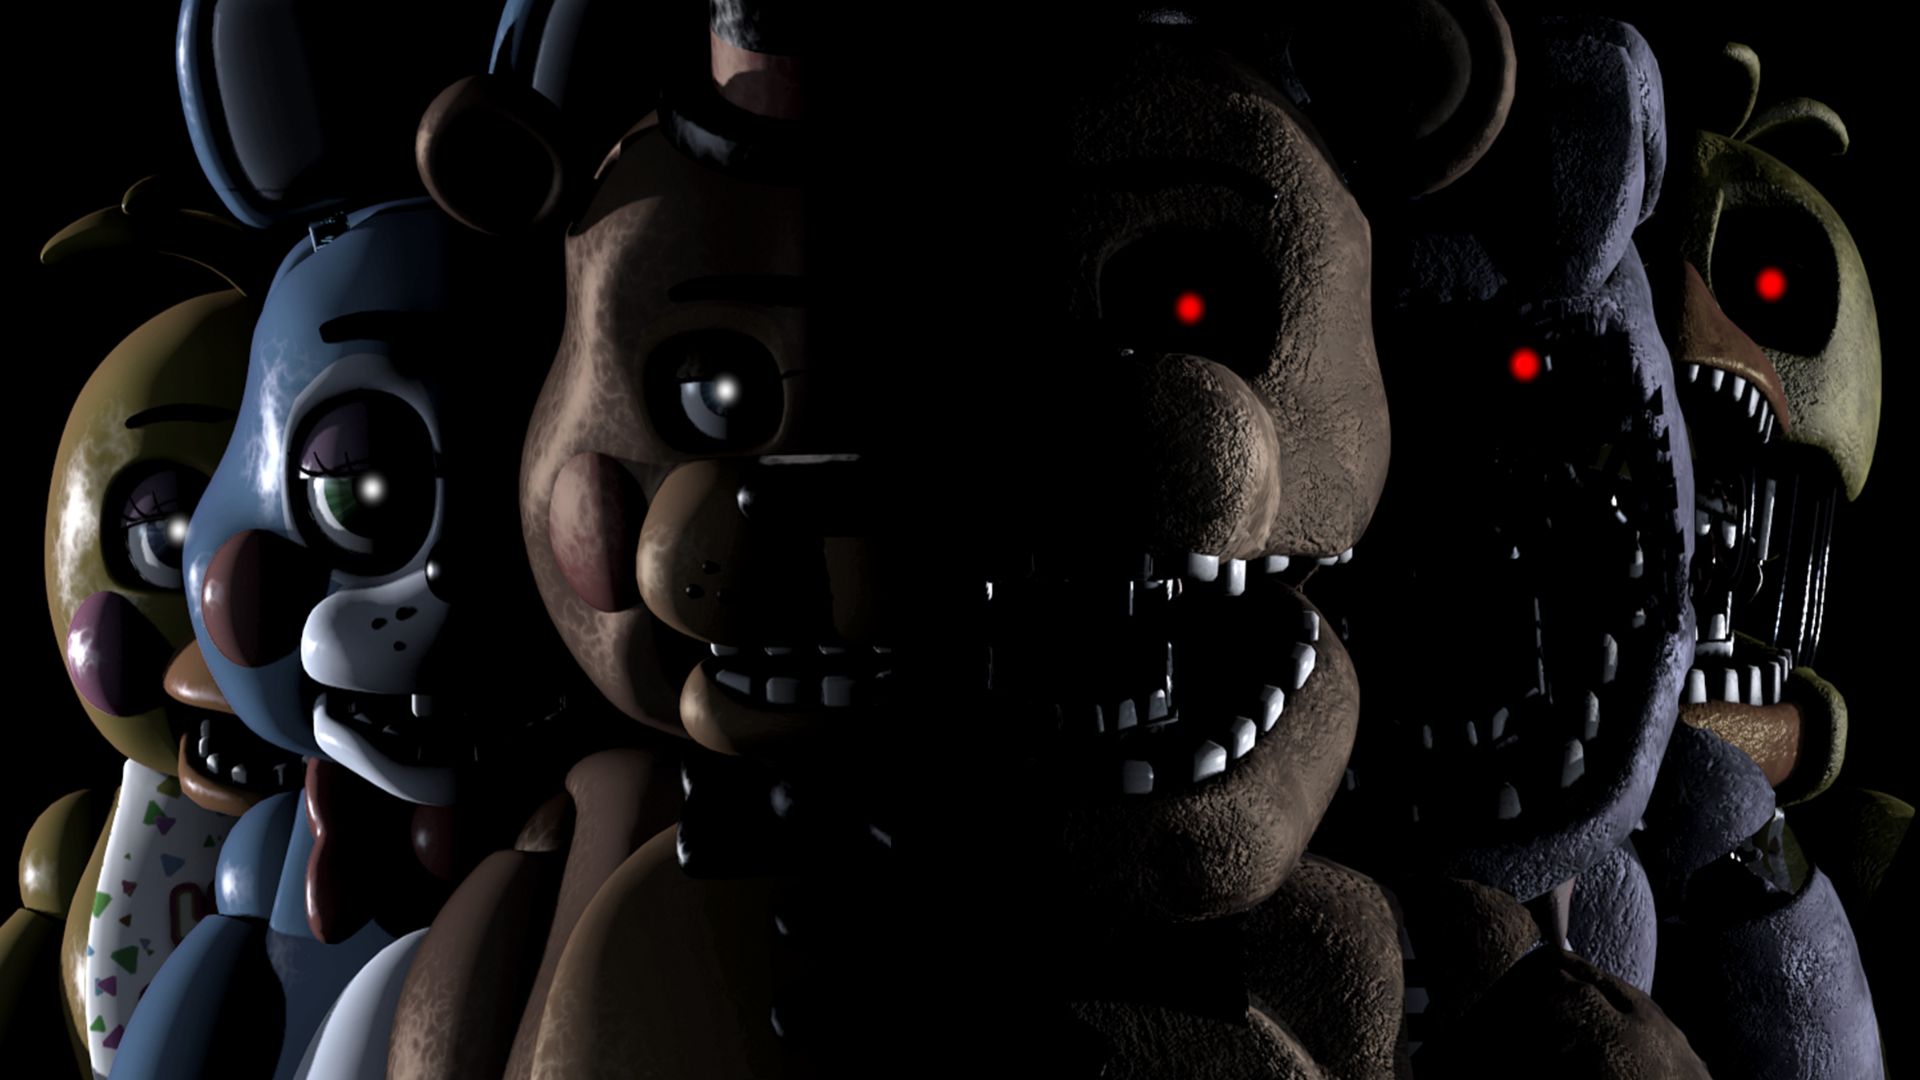 HD Wallpapers For Five Nights At Freddy's Edition - Best FNAF